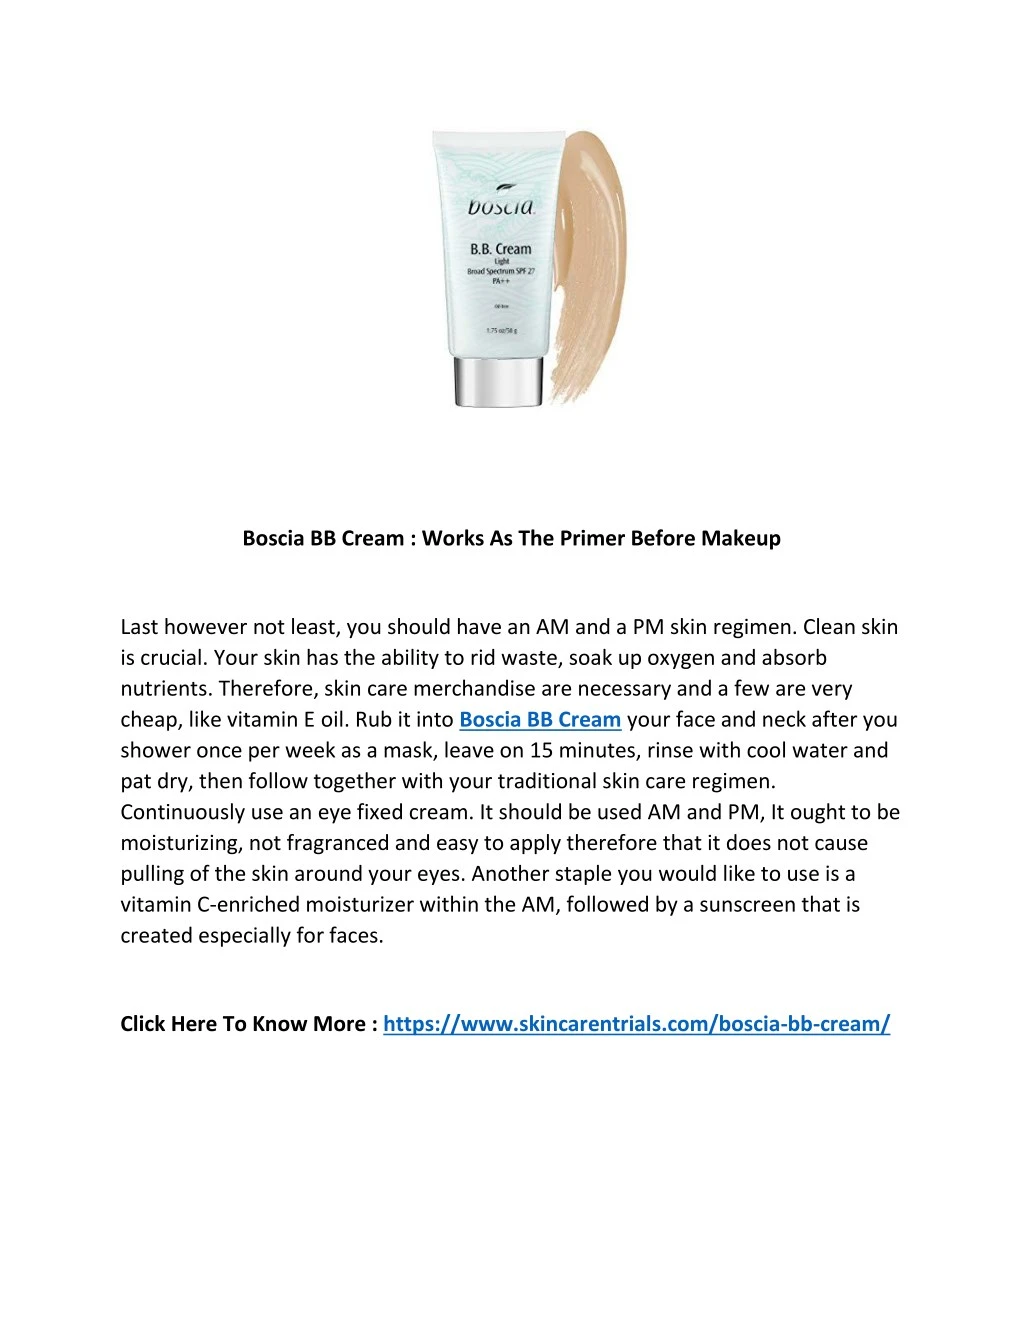 boscia bb cream works as the primer before makeup